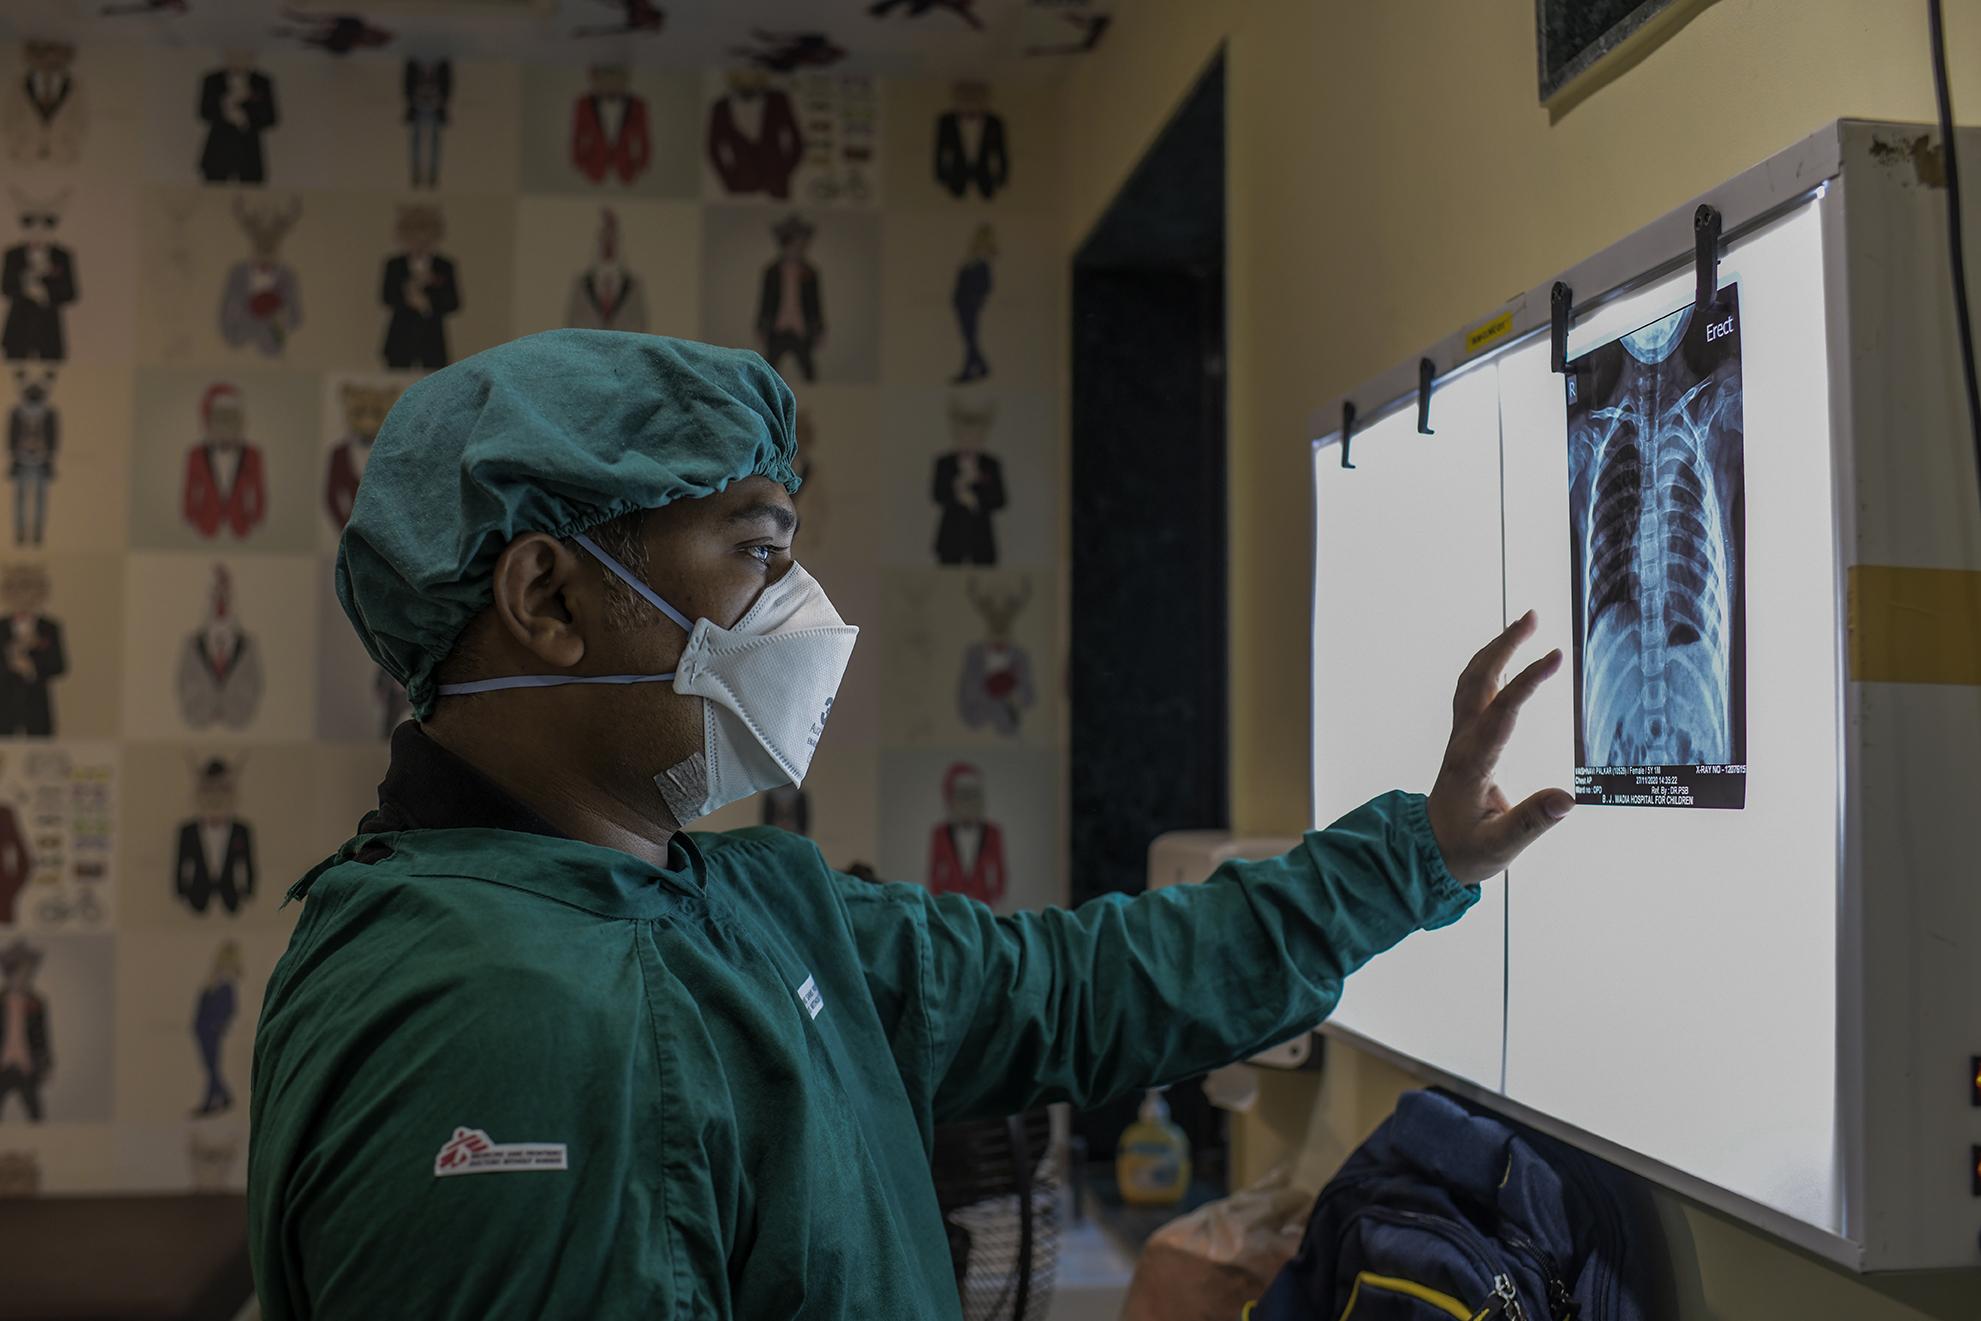 MSF, Doctors Without Borders, World TB Day, India, South Africa 